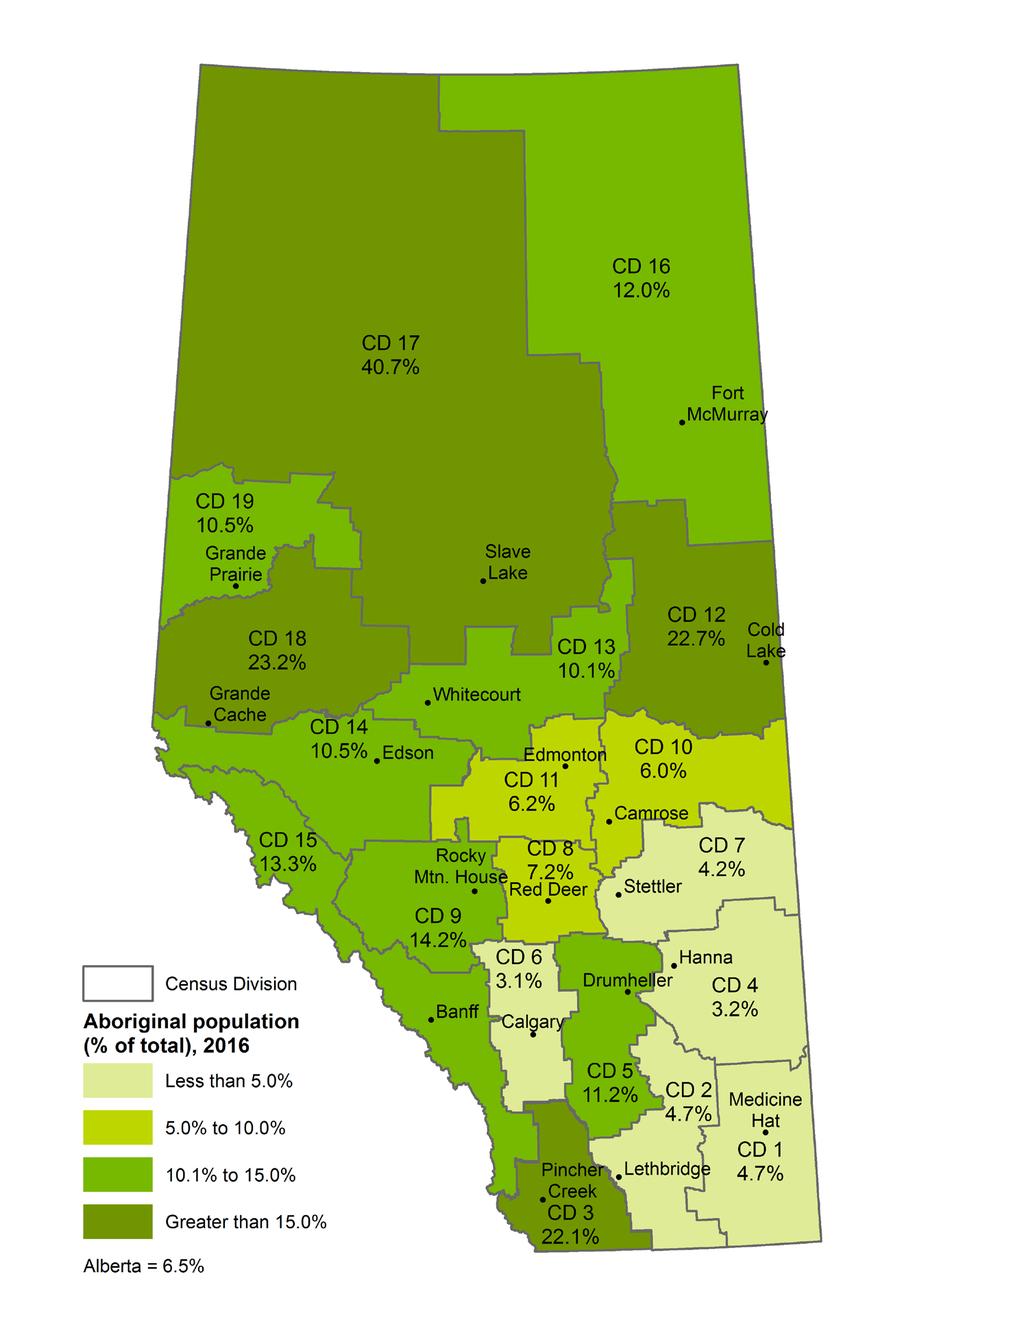 2016 Census of Canada - People Page 5/6 Map 1. Population Distribution (% of Total Population in Each CD) Figure 3.